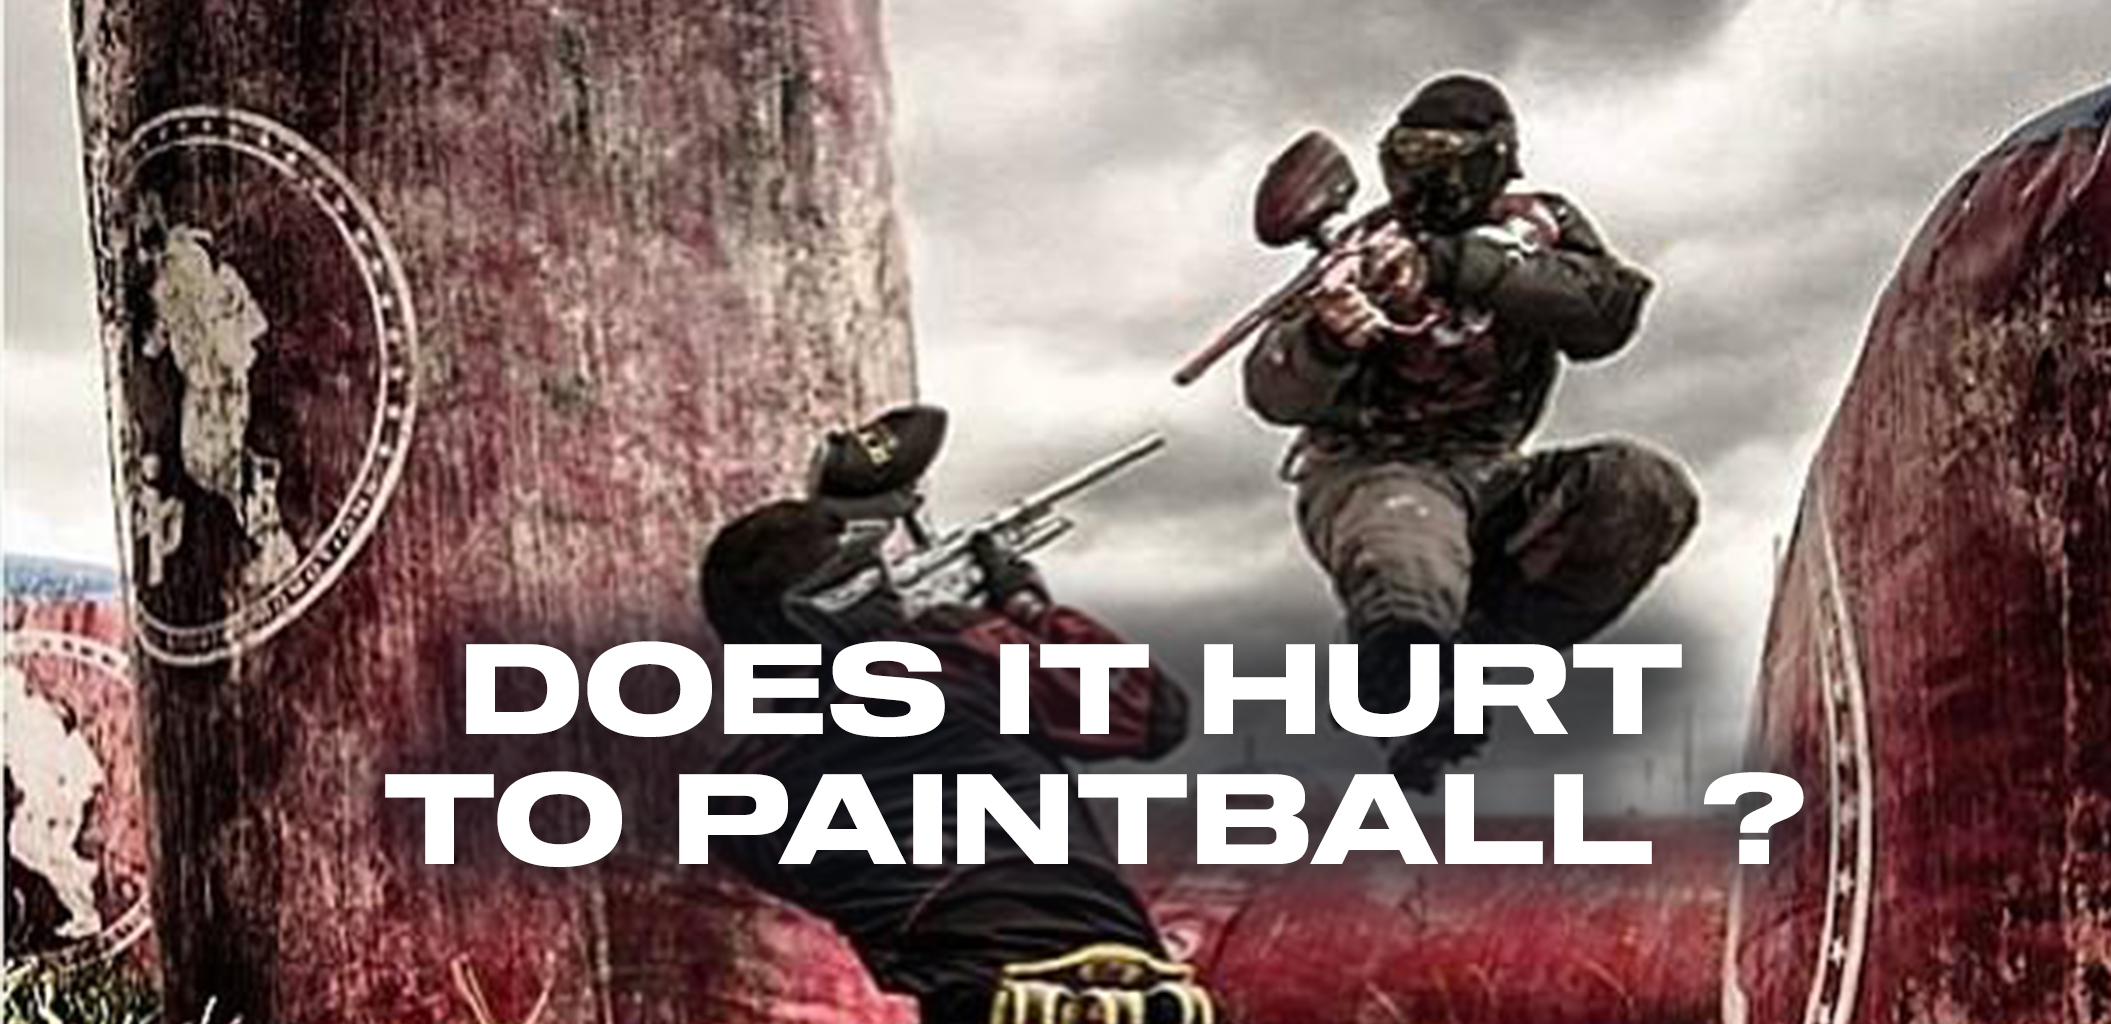 Does it hurt to paintball ?